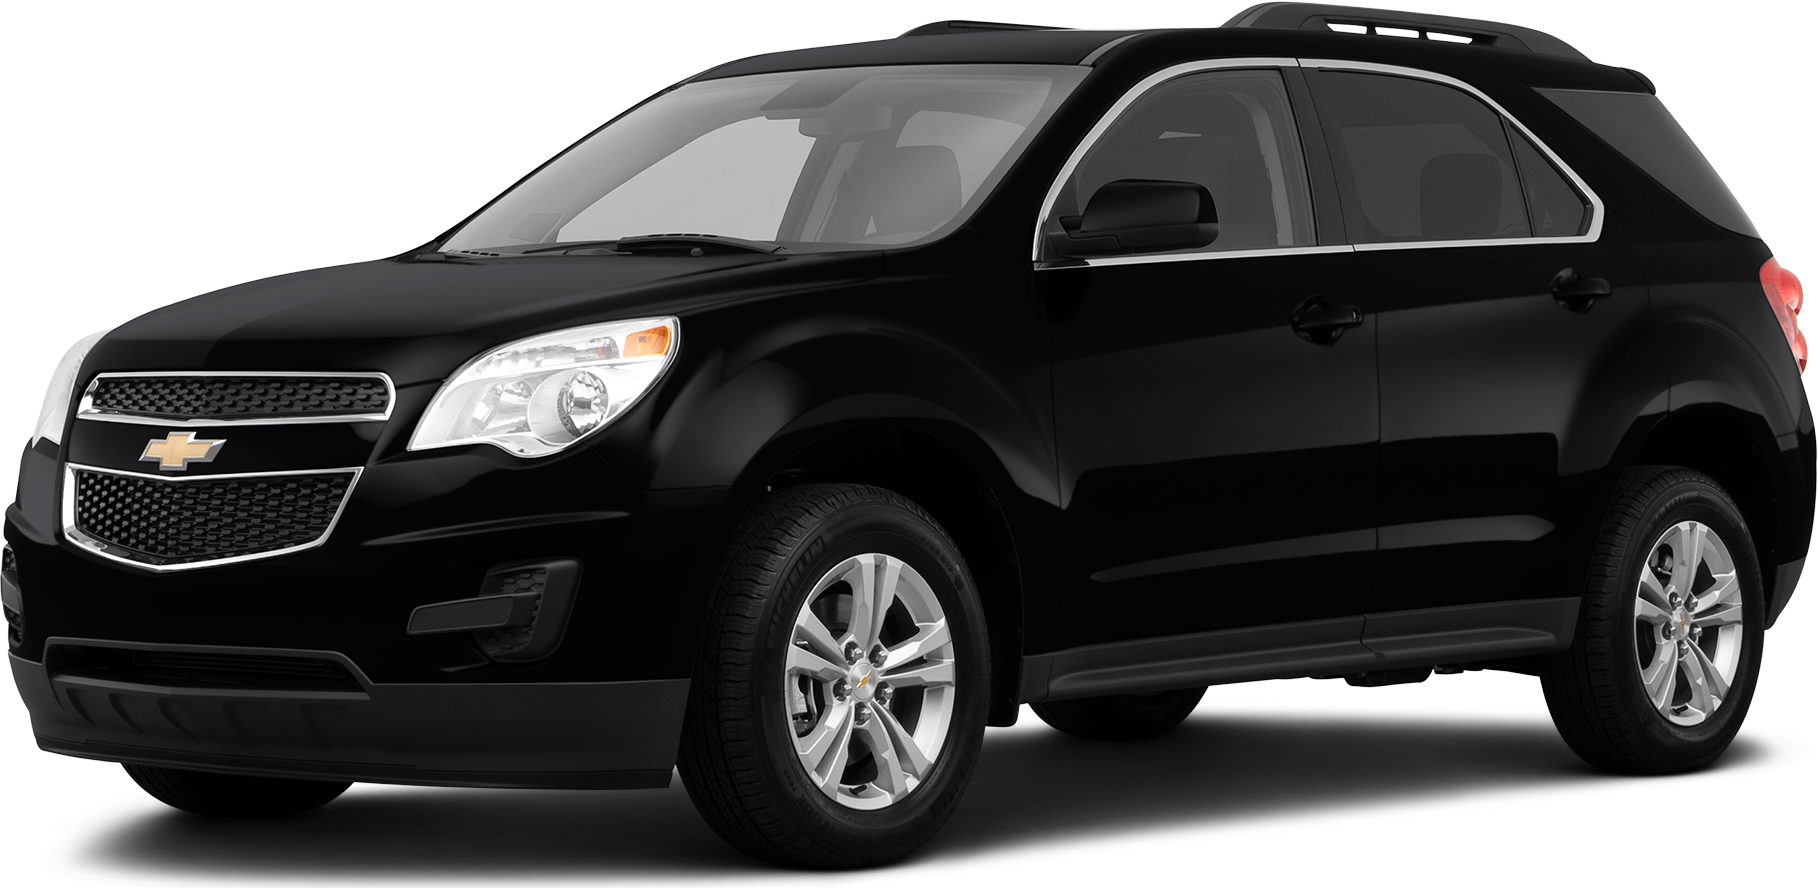 2013 Chevrolet Equinox Values & Cars for Sale | Kelley Blue Book